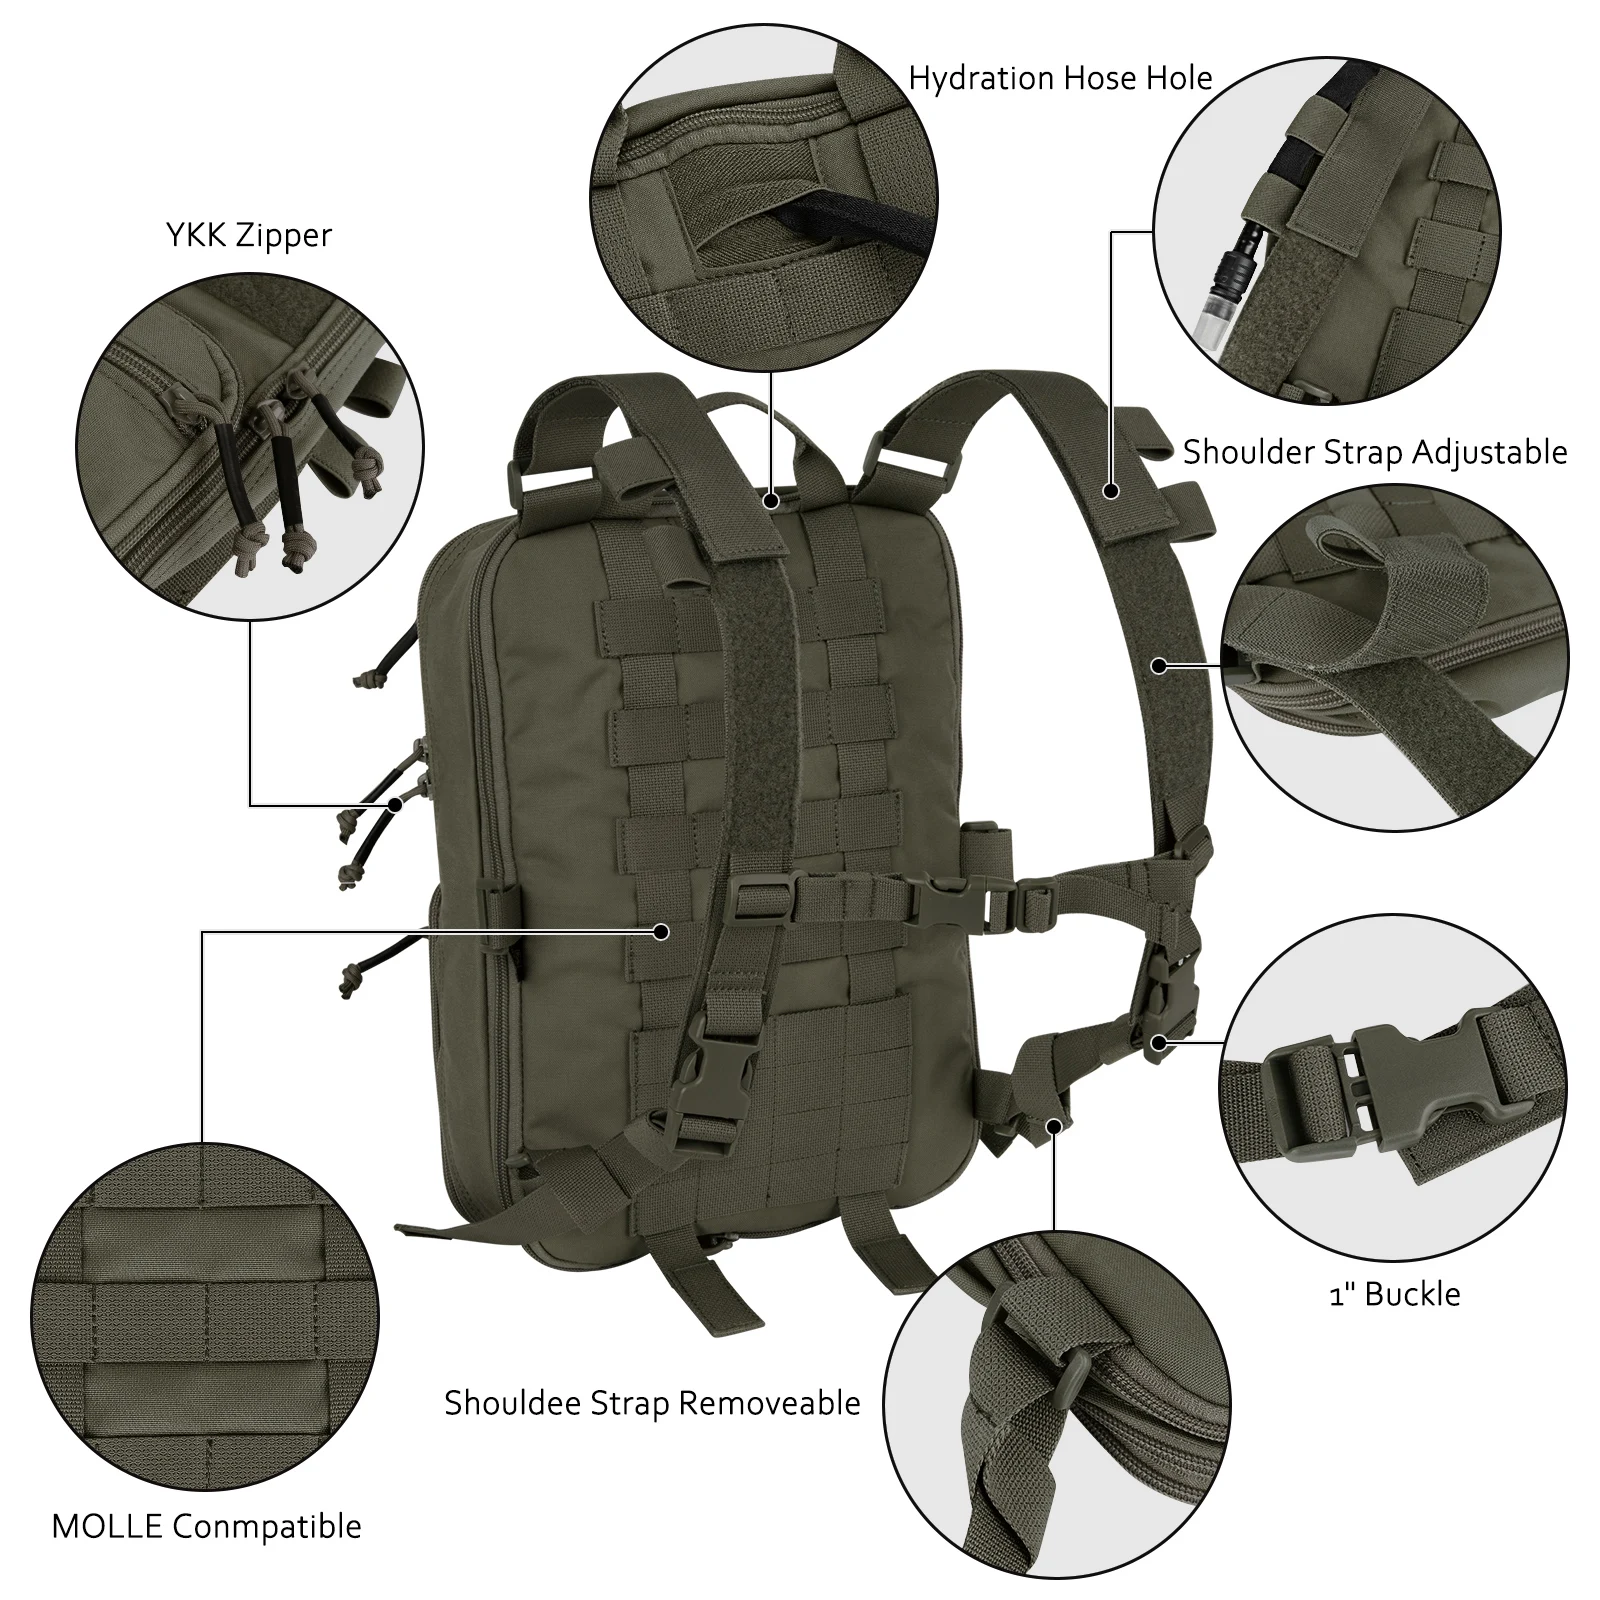 KRYDEX Tactical Flatpack D3 Backpack Bag 23L Expandable Assaulter Pack Hydration MOLLE Strap Travel EDC Pack Hunting Accessories